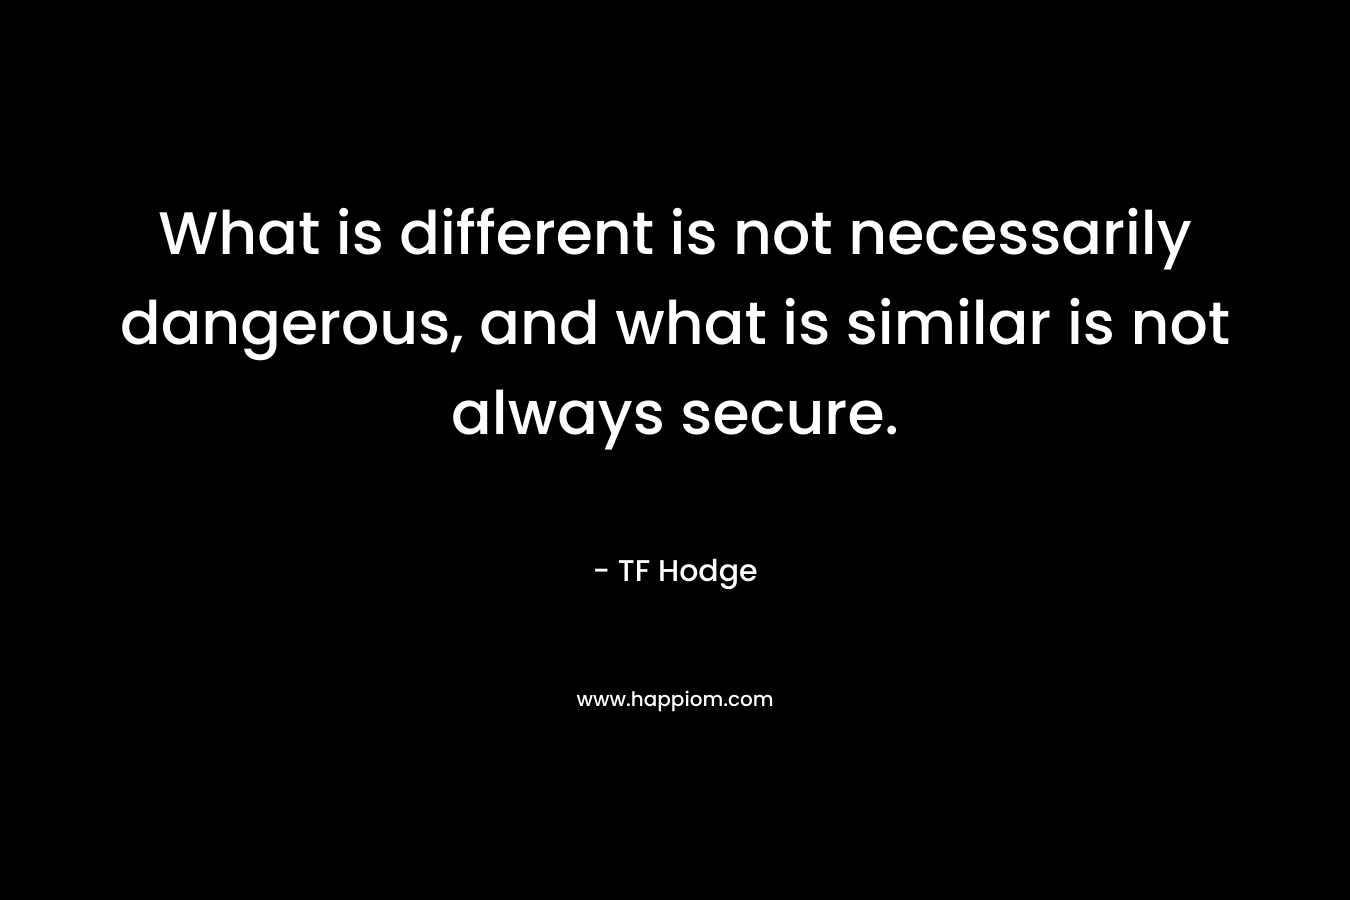 What is different is not necessarily dangerous, and what is similar is not always secure. – TF Hodge